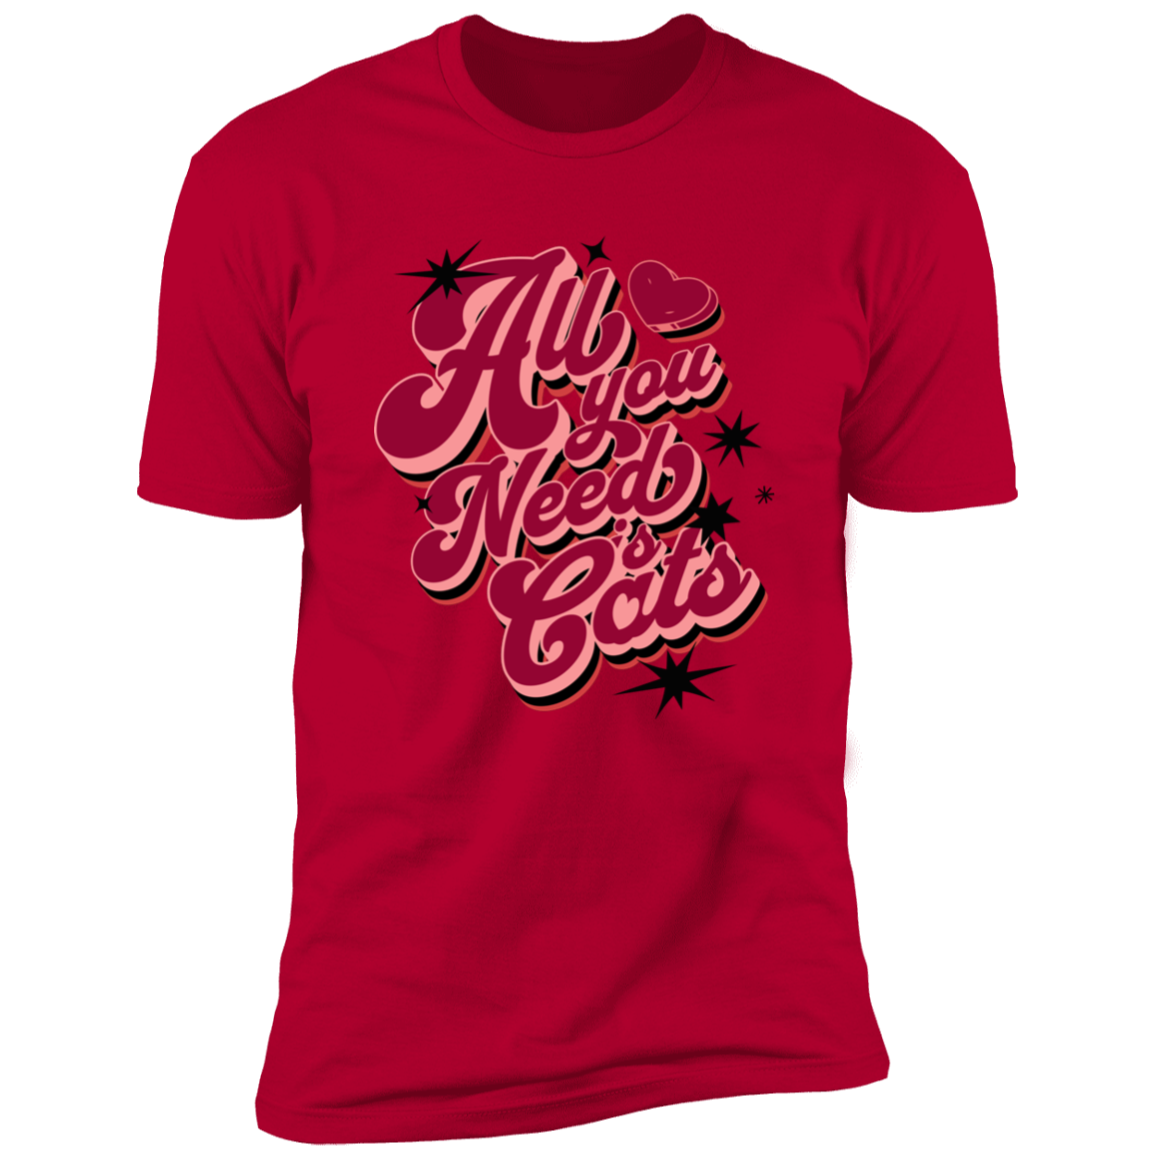 All I Need is Cats T-shirt, Cat Shirt for humans, in red